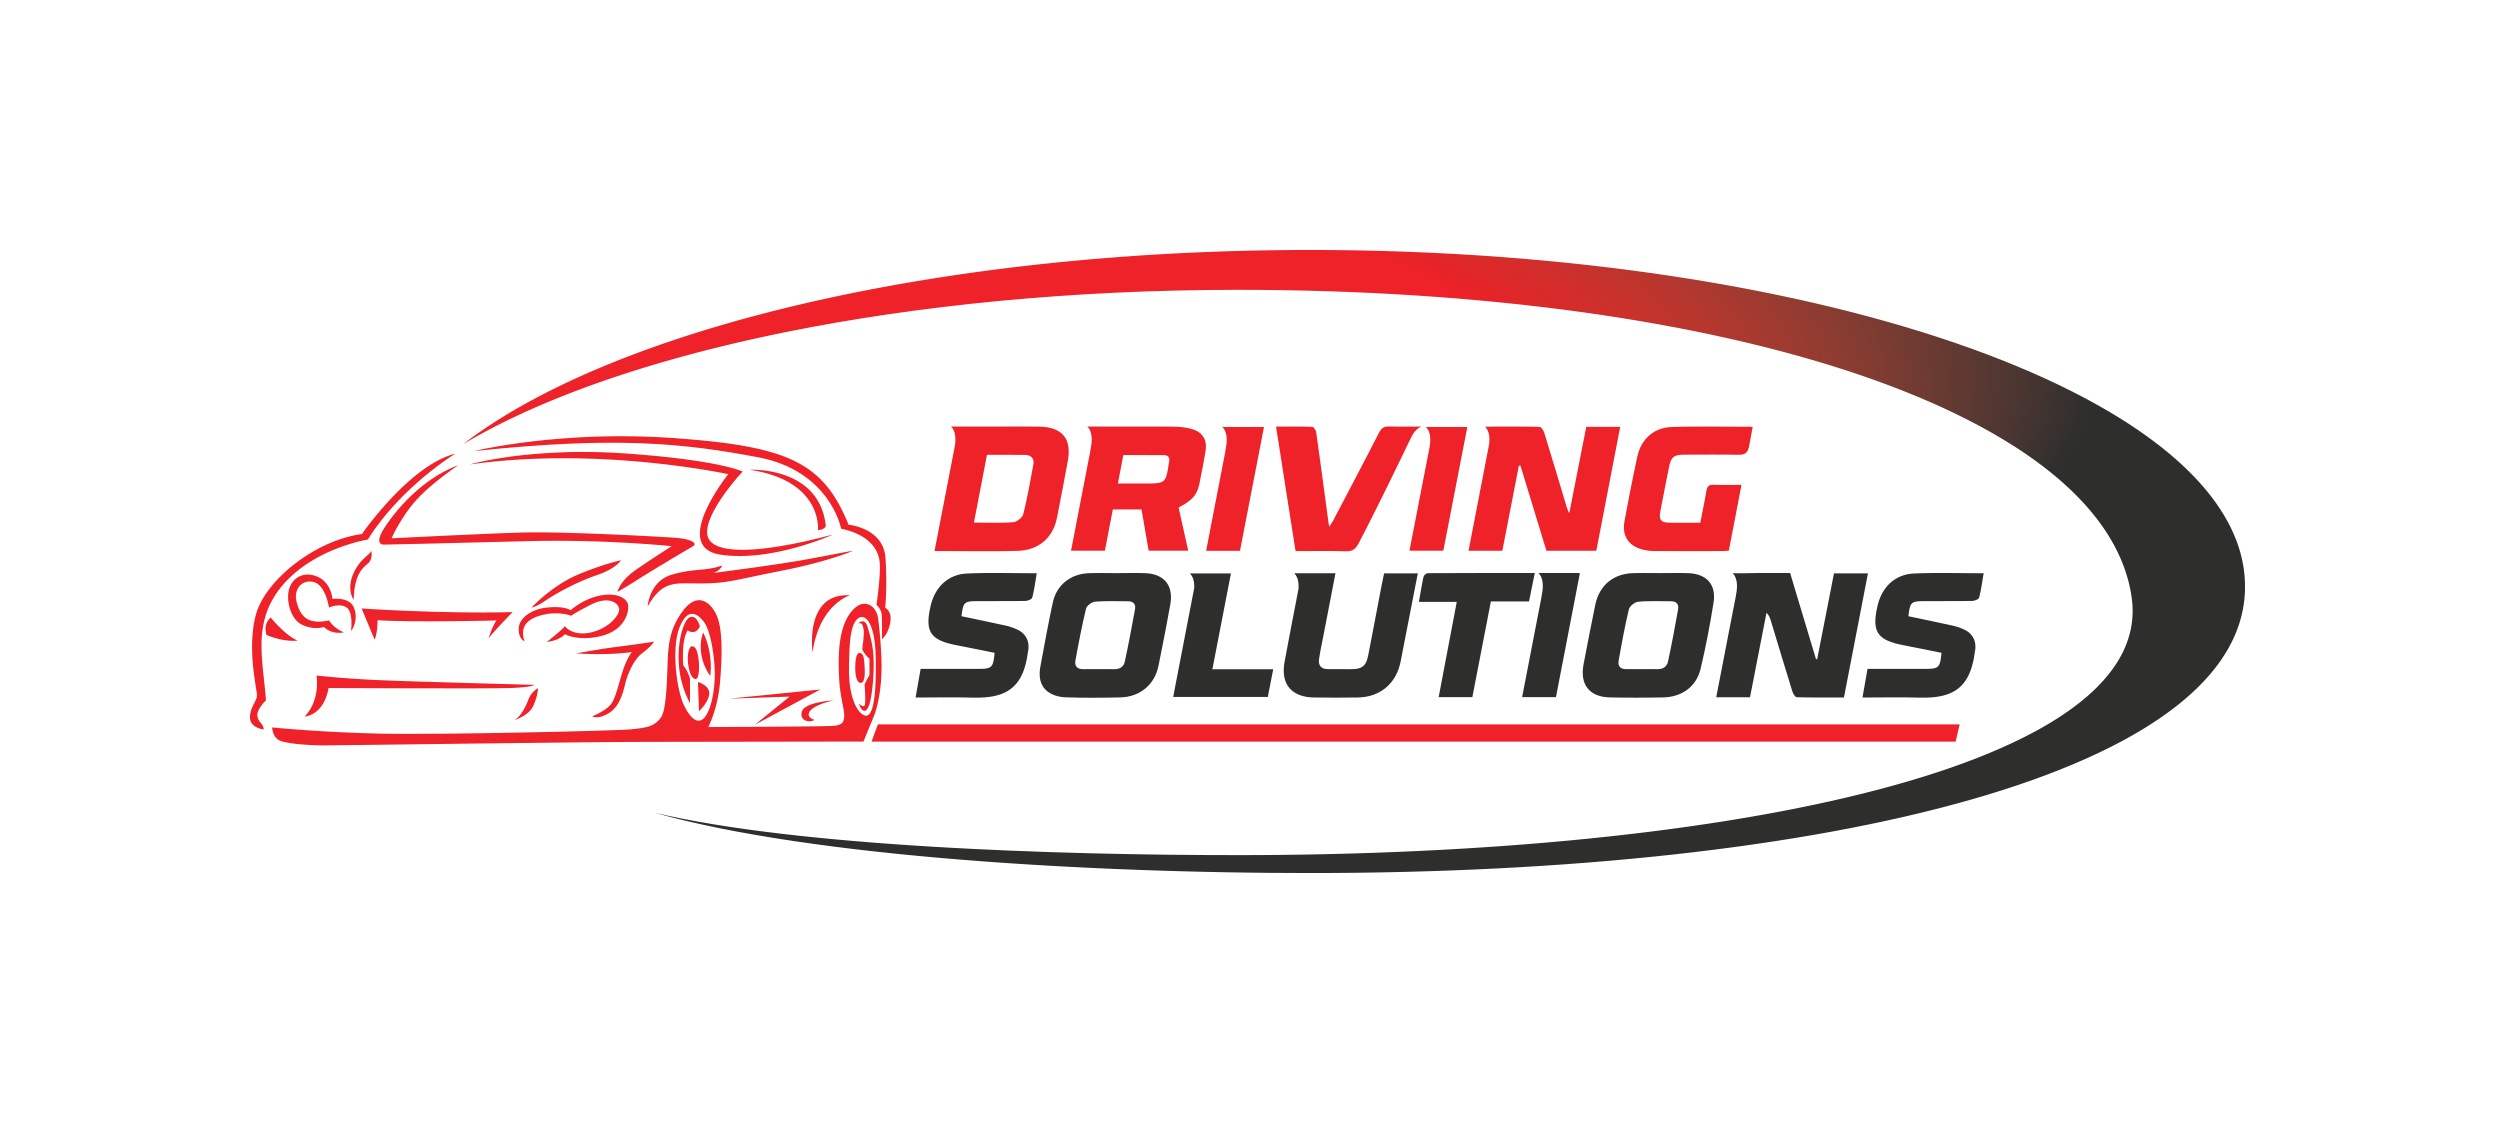 Driving Solutions